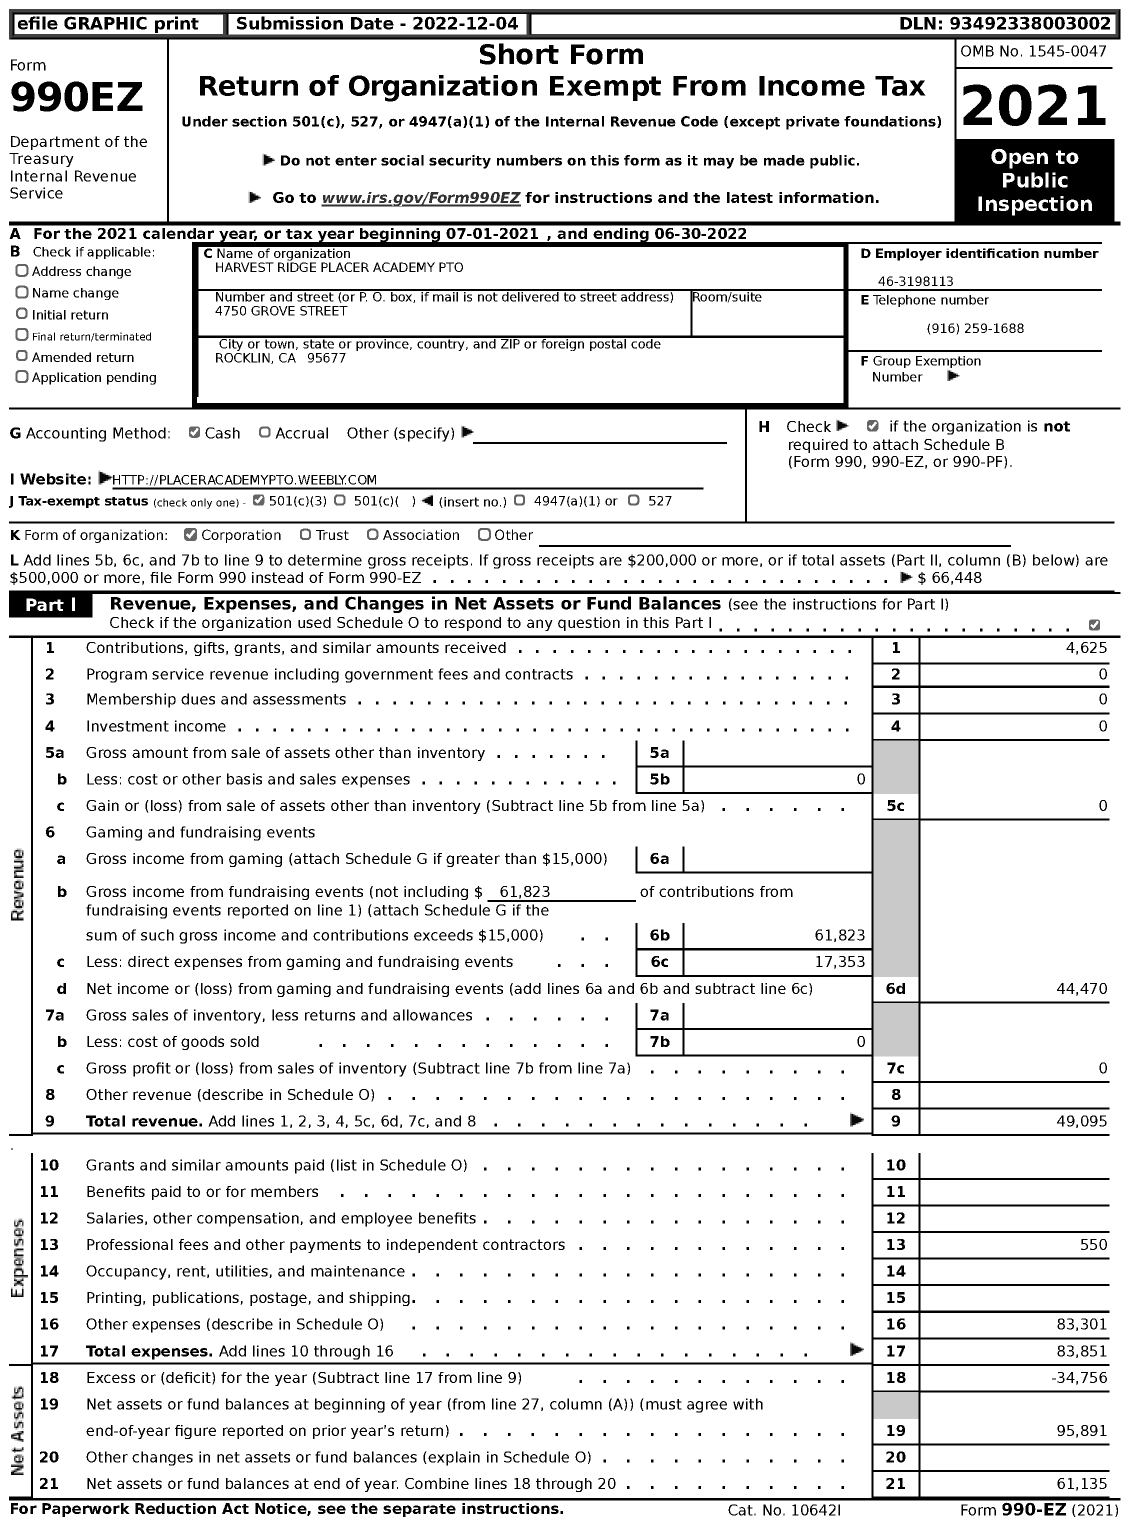 Image of first page of 2021 Form 990EZ for Harvest Ridge Placer Academy Pto